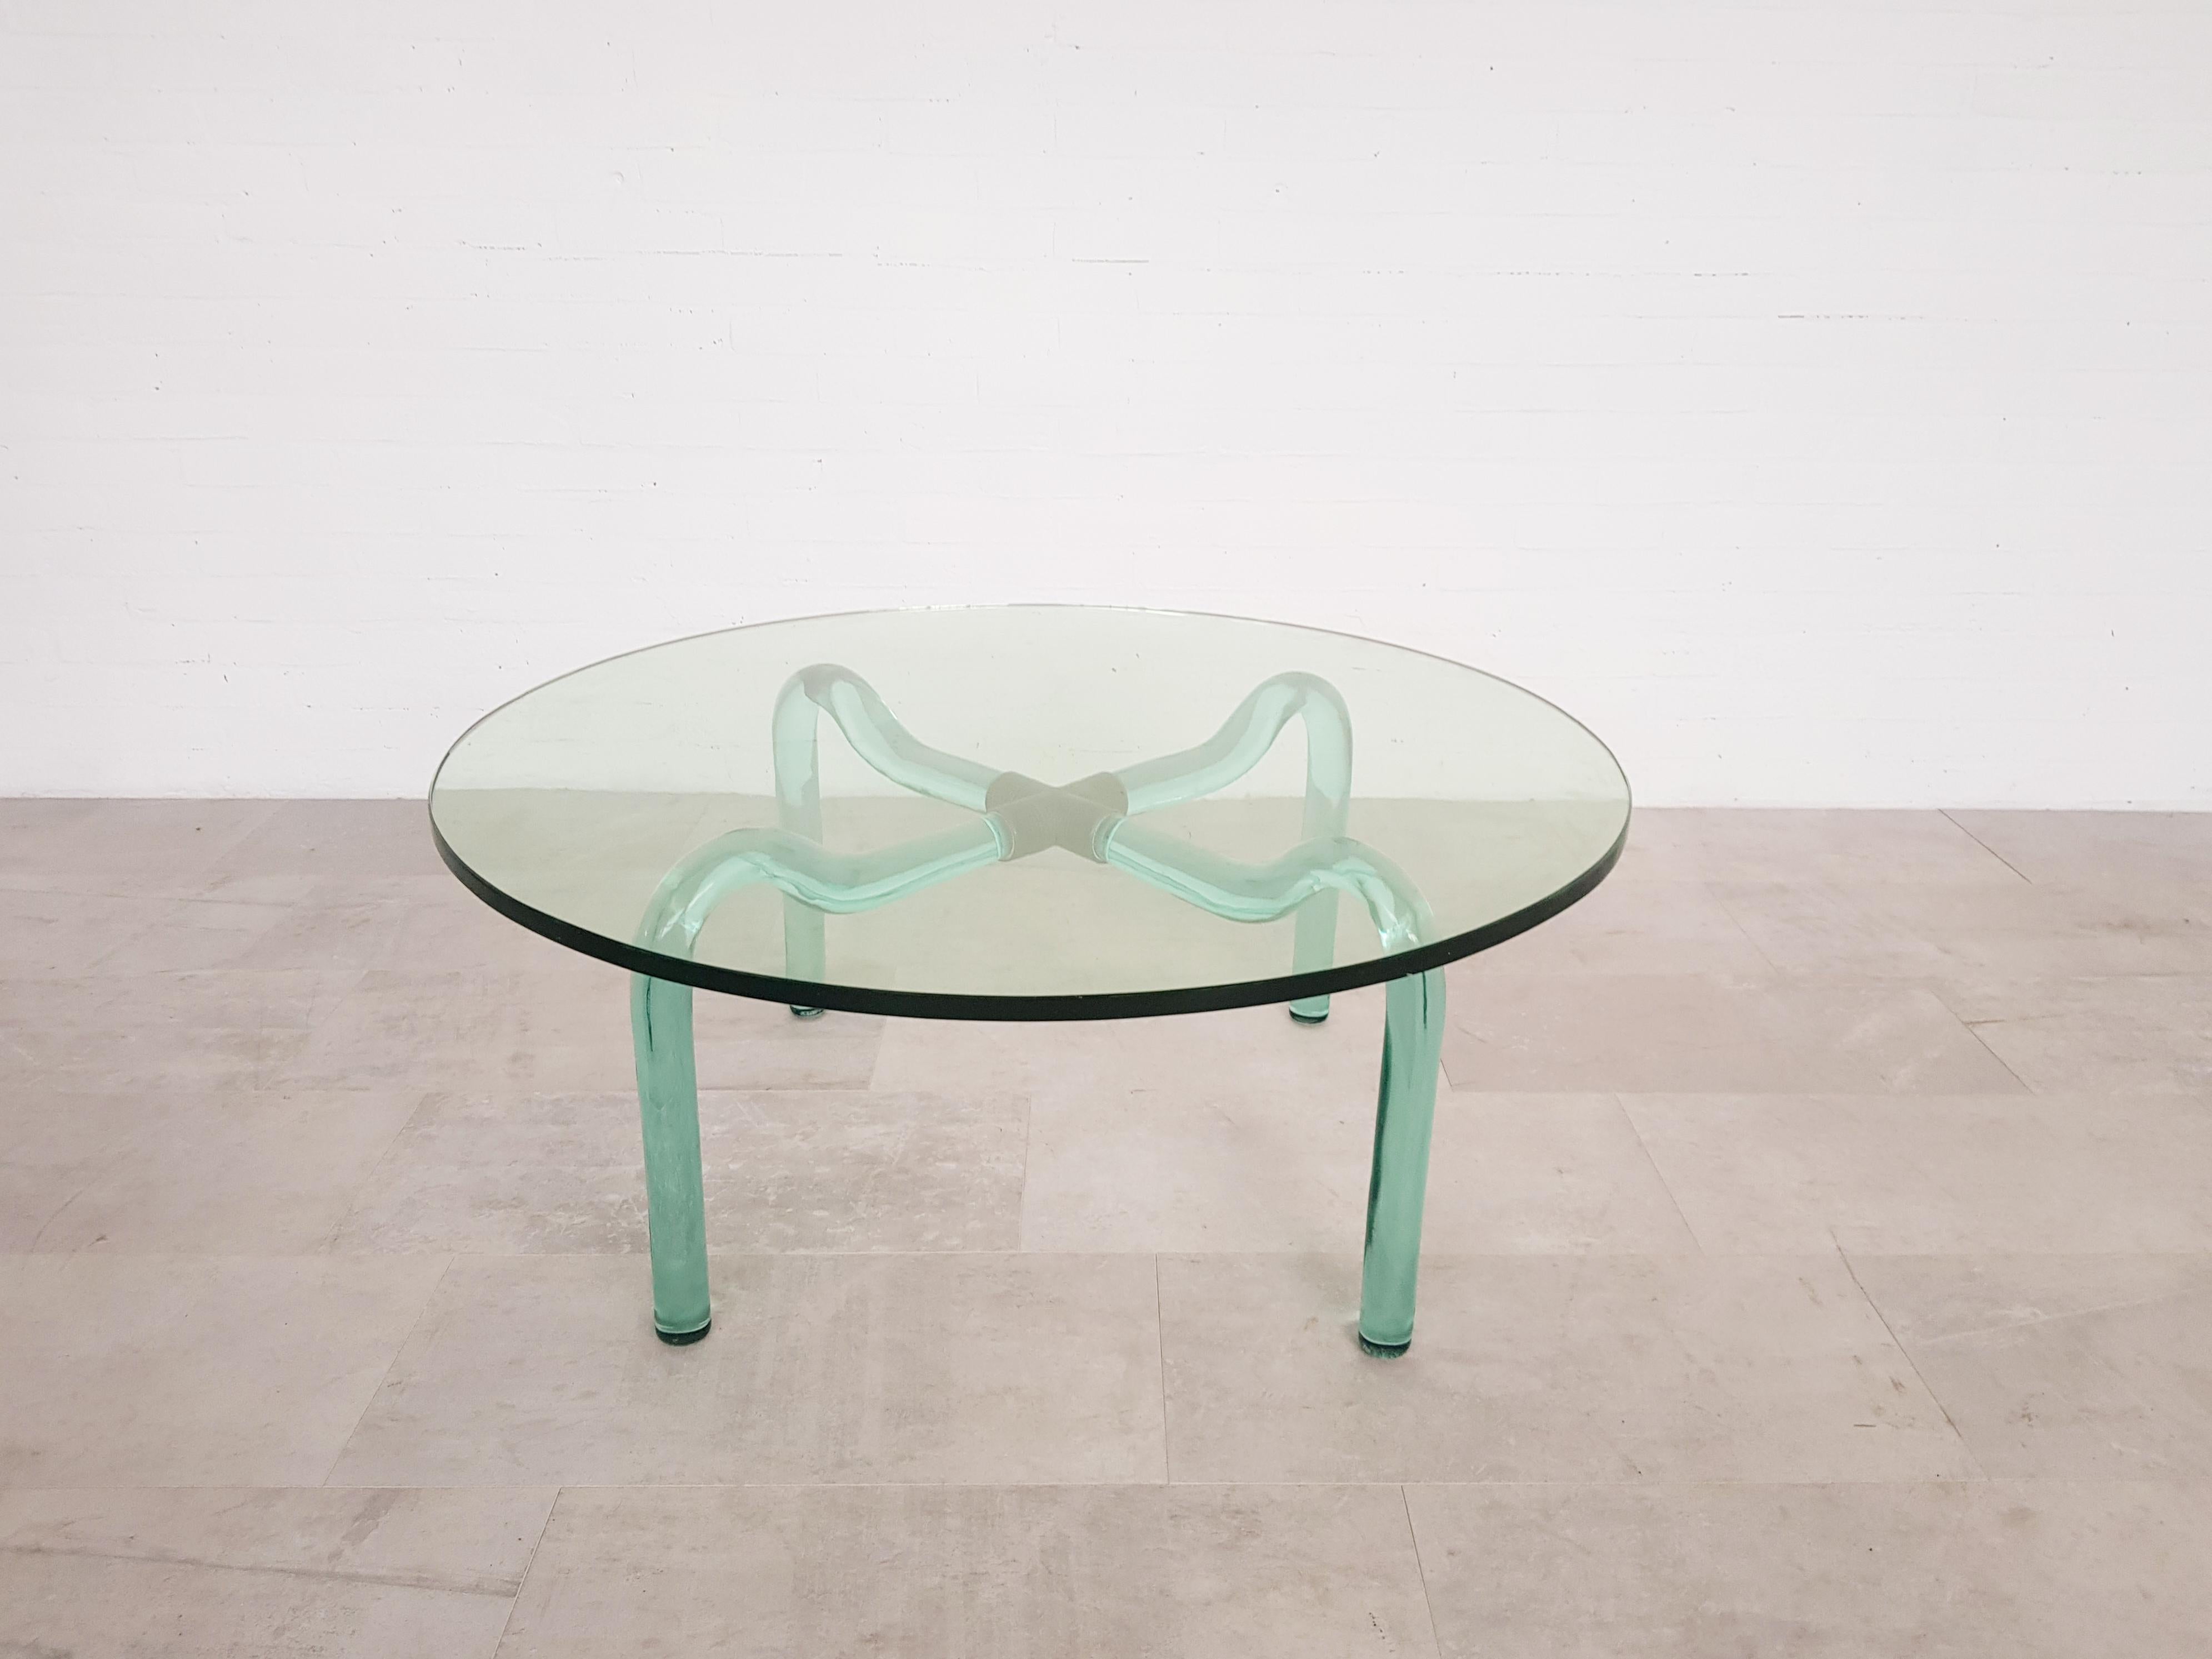 Art Deco glass coffee table produced by Seguso in the 1950s. Beautiful green cut-ground glass and brass connection. All original
Fits well in a chic interior inspired by Max Ingrand, Fontana Arte, Barovier & Tosso.